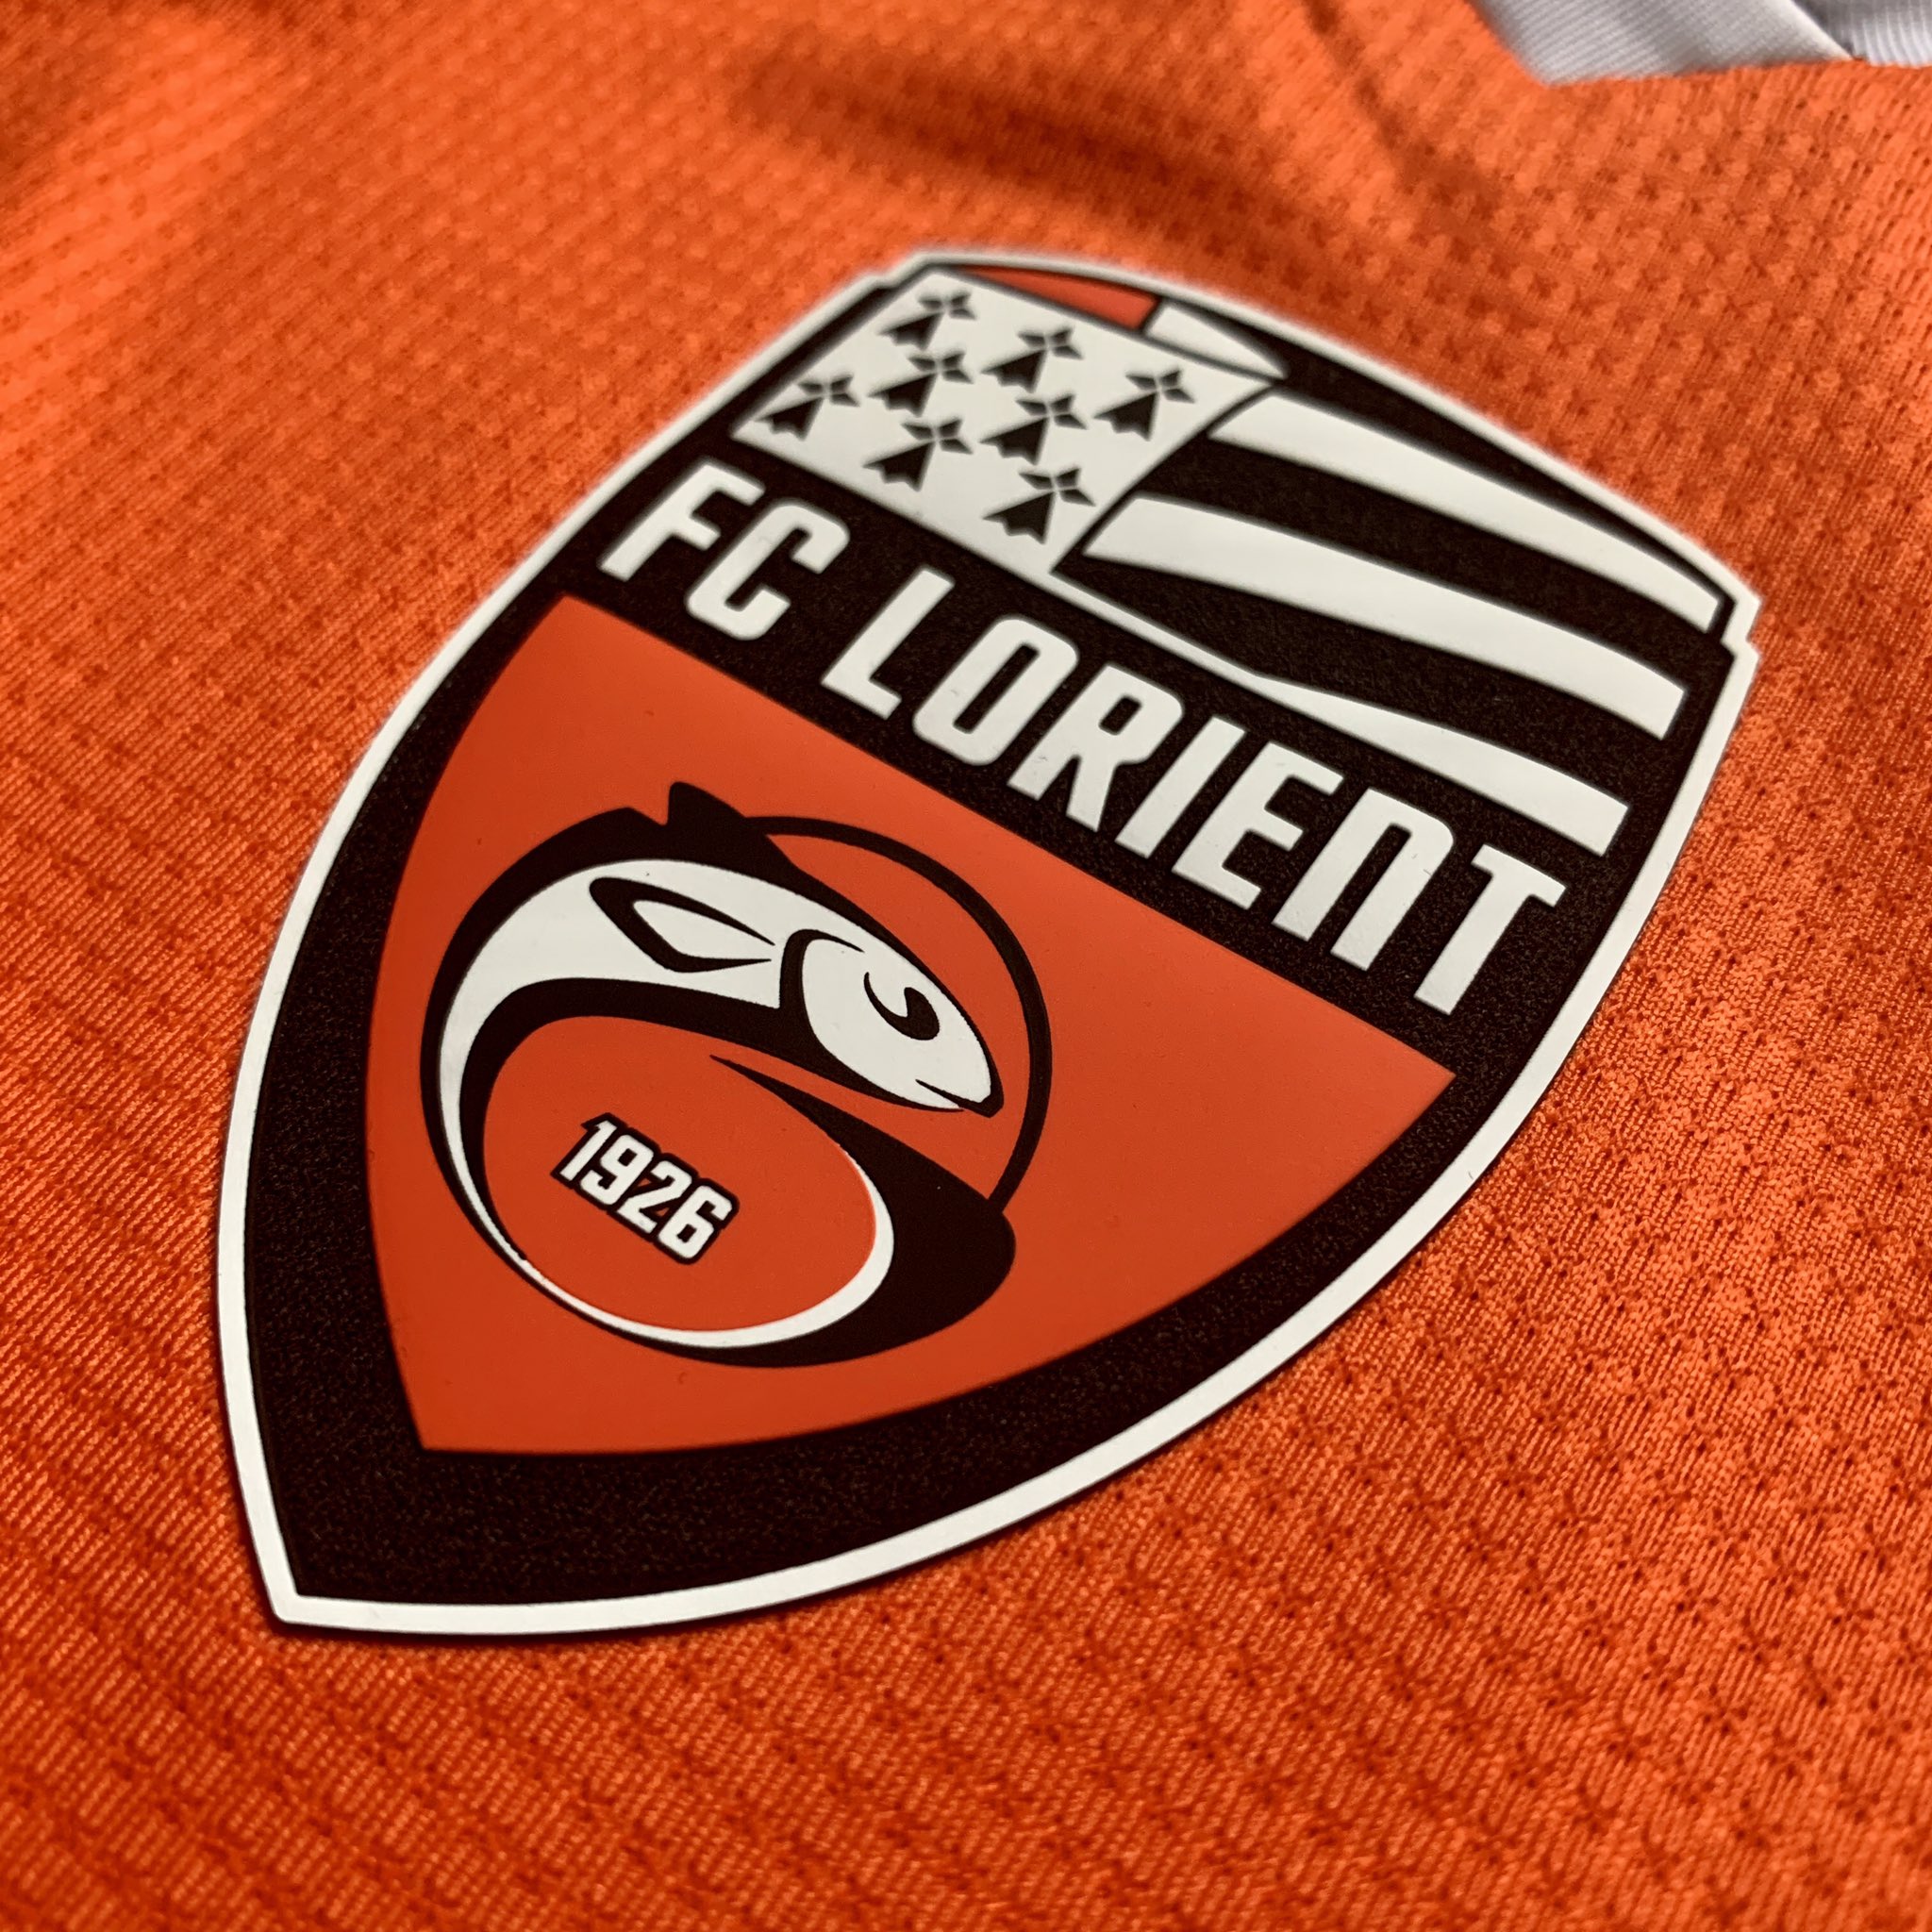 Fc Lorient Wallpapers